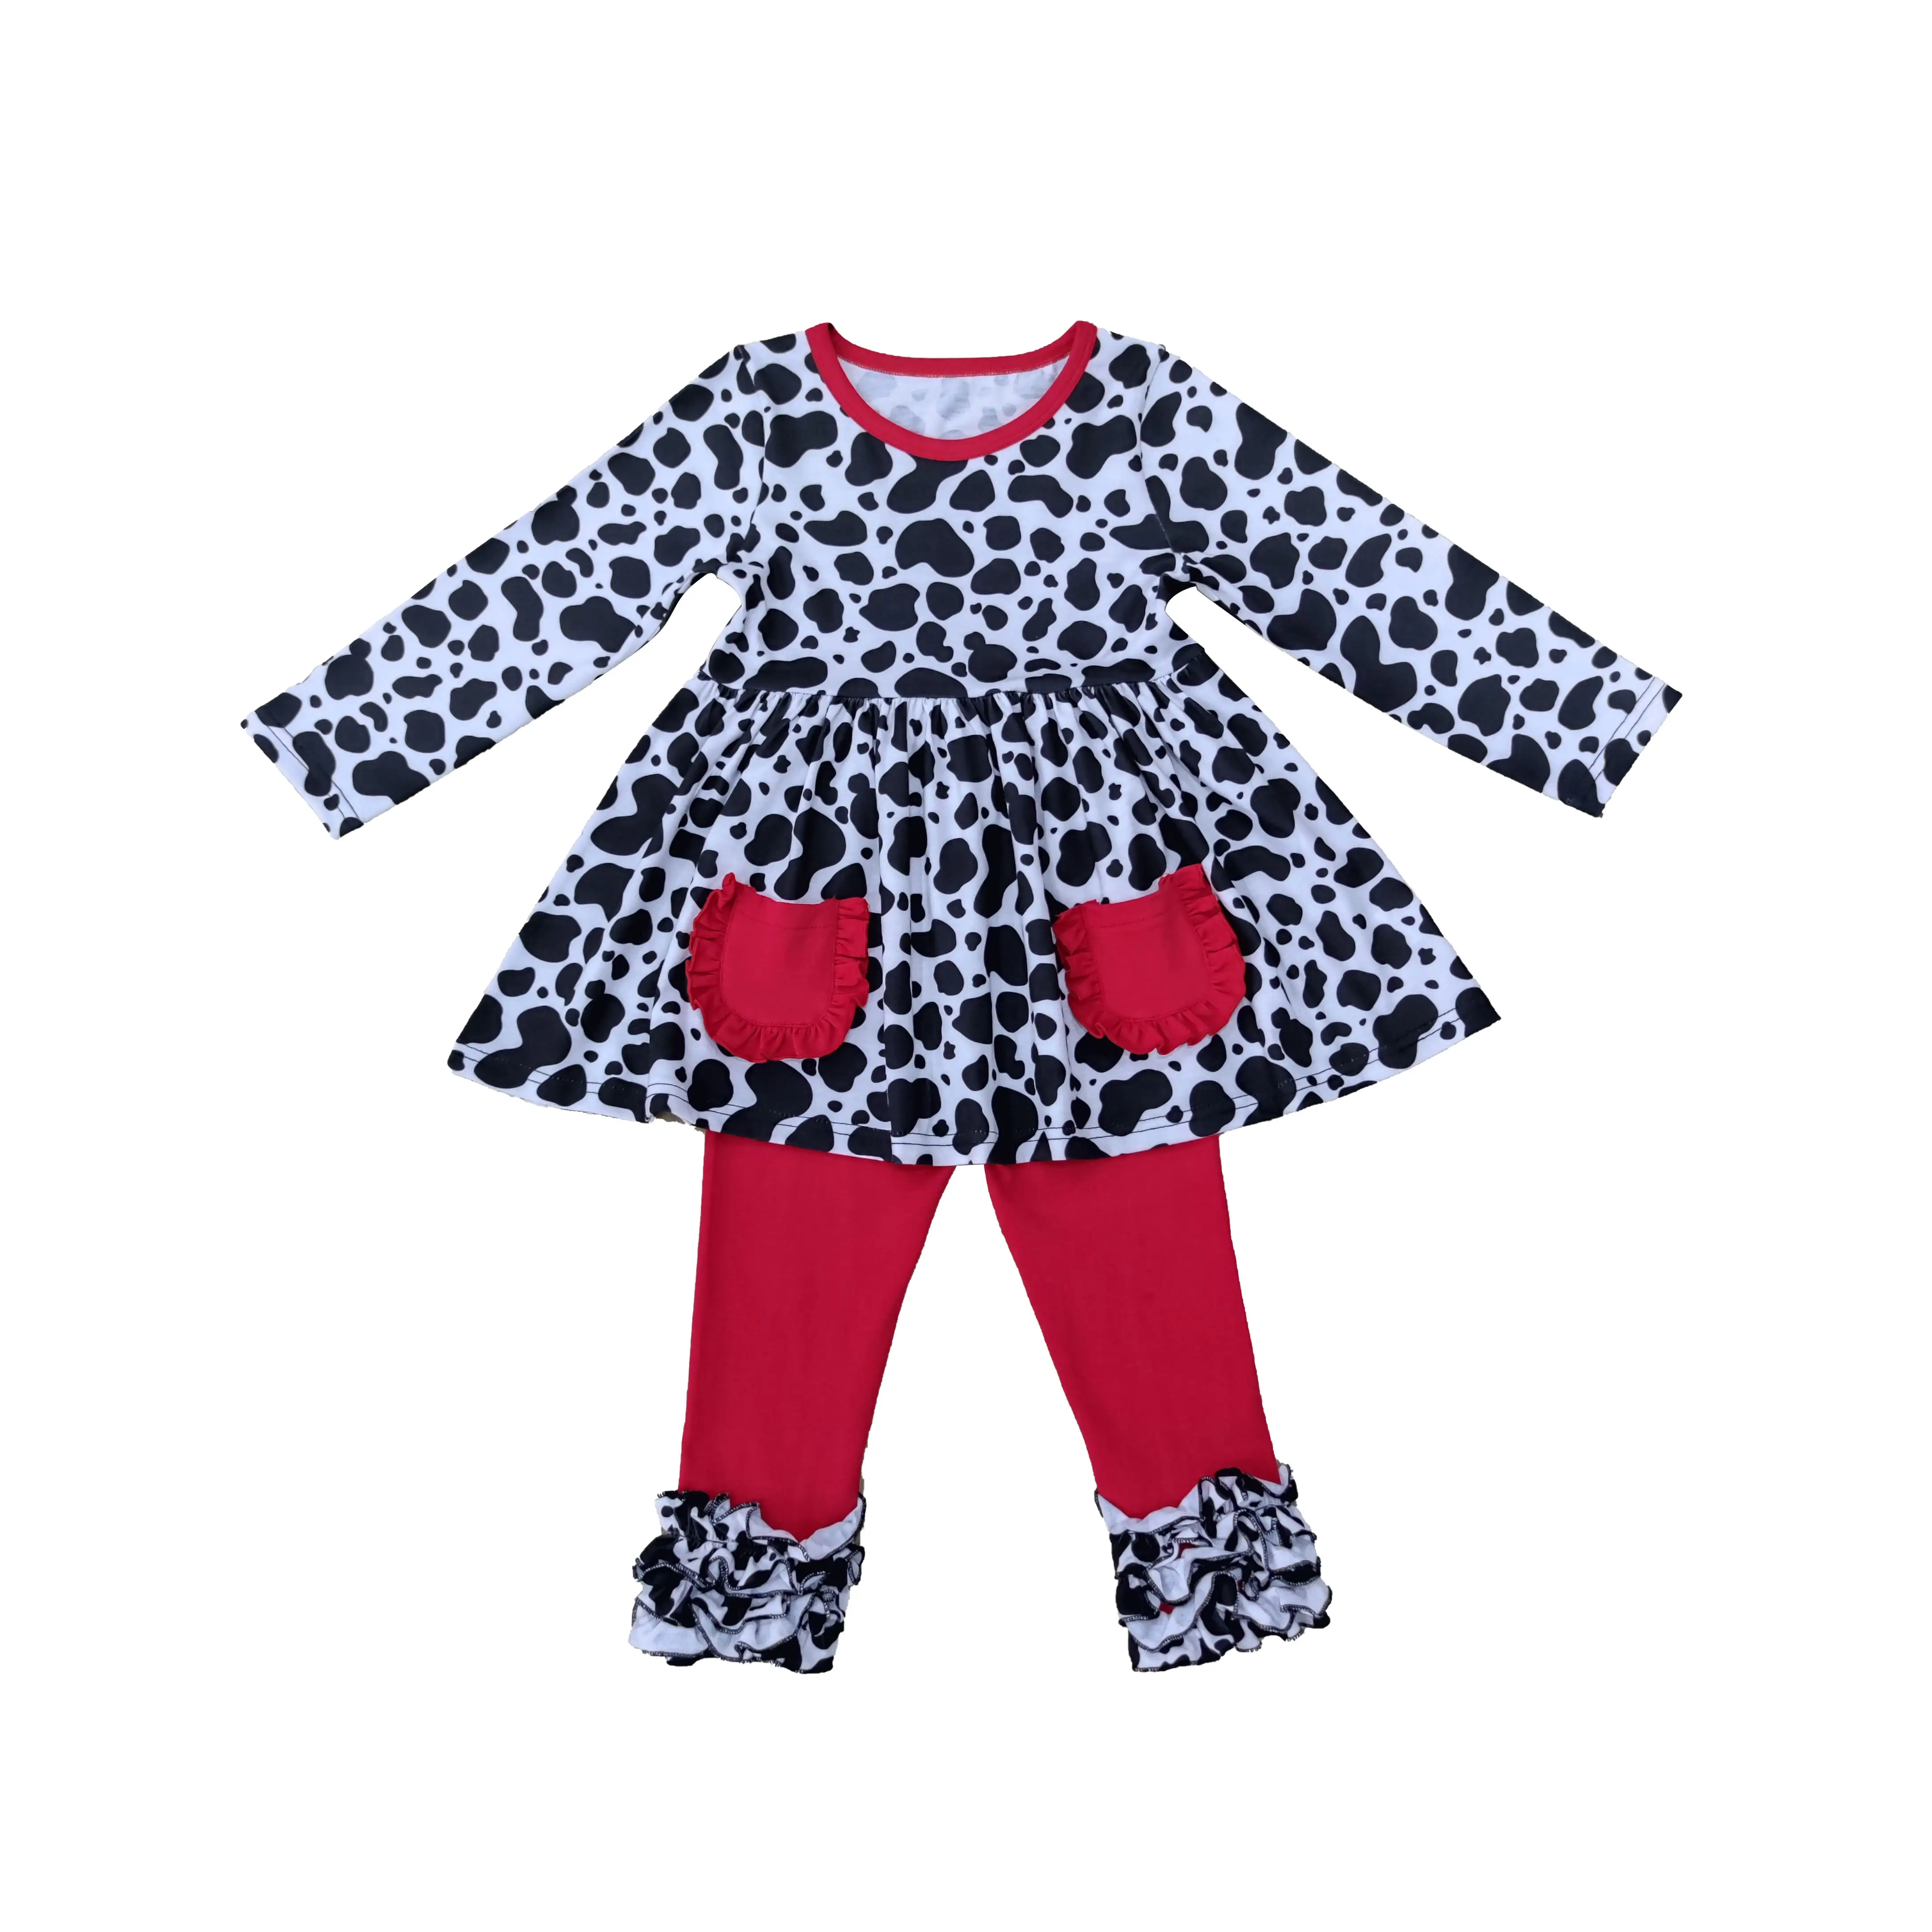 Wholesale Toddler christmas clothing boutique outfits 2020 baby set girls clothing